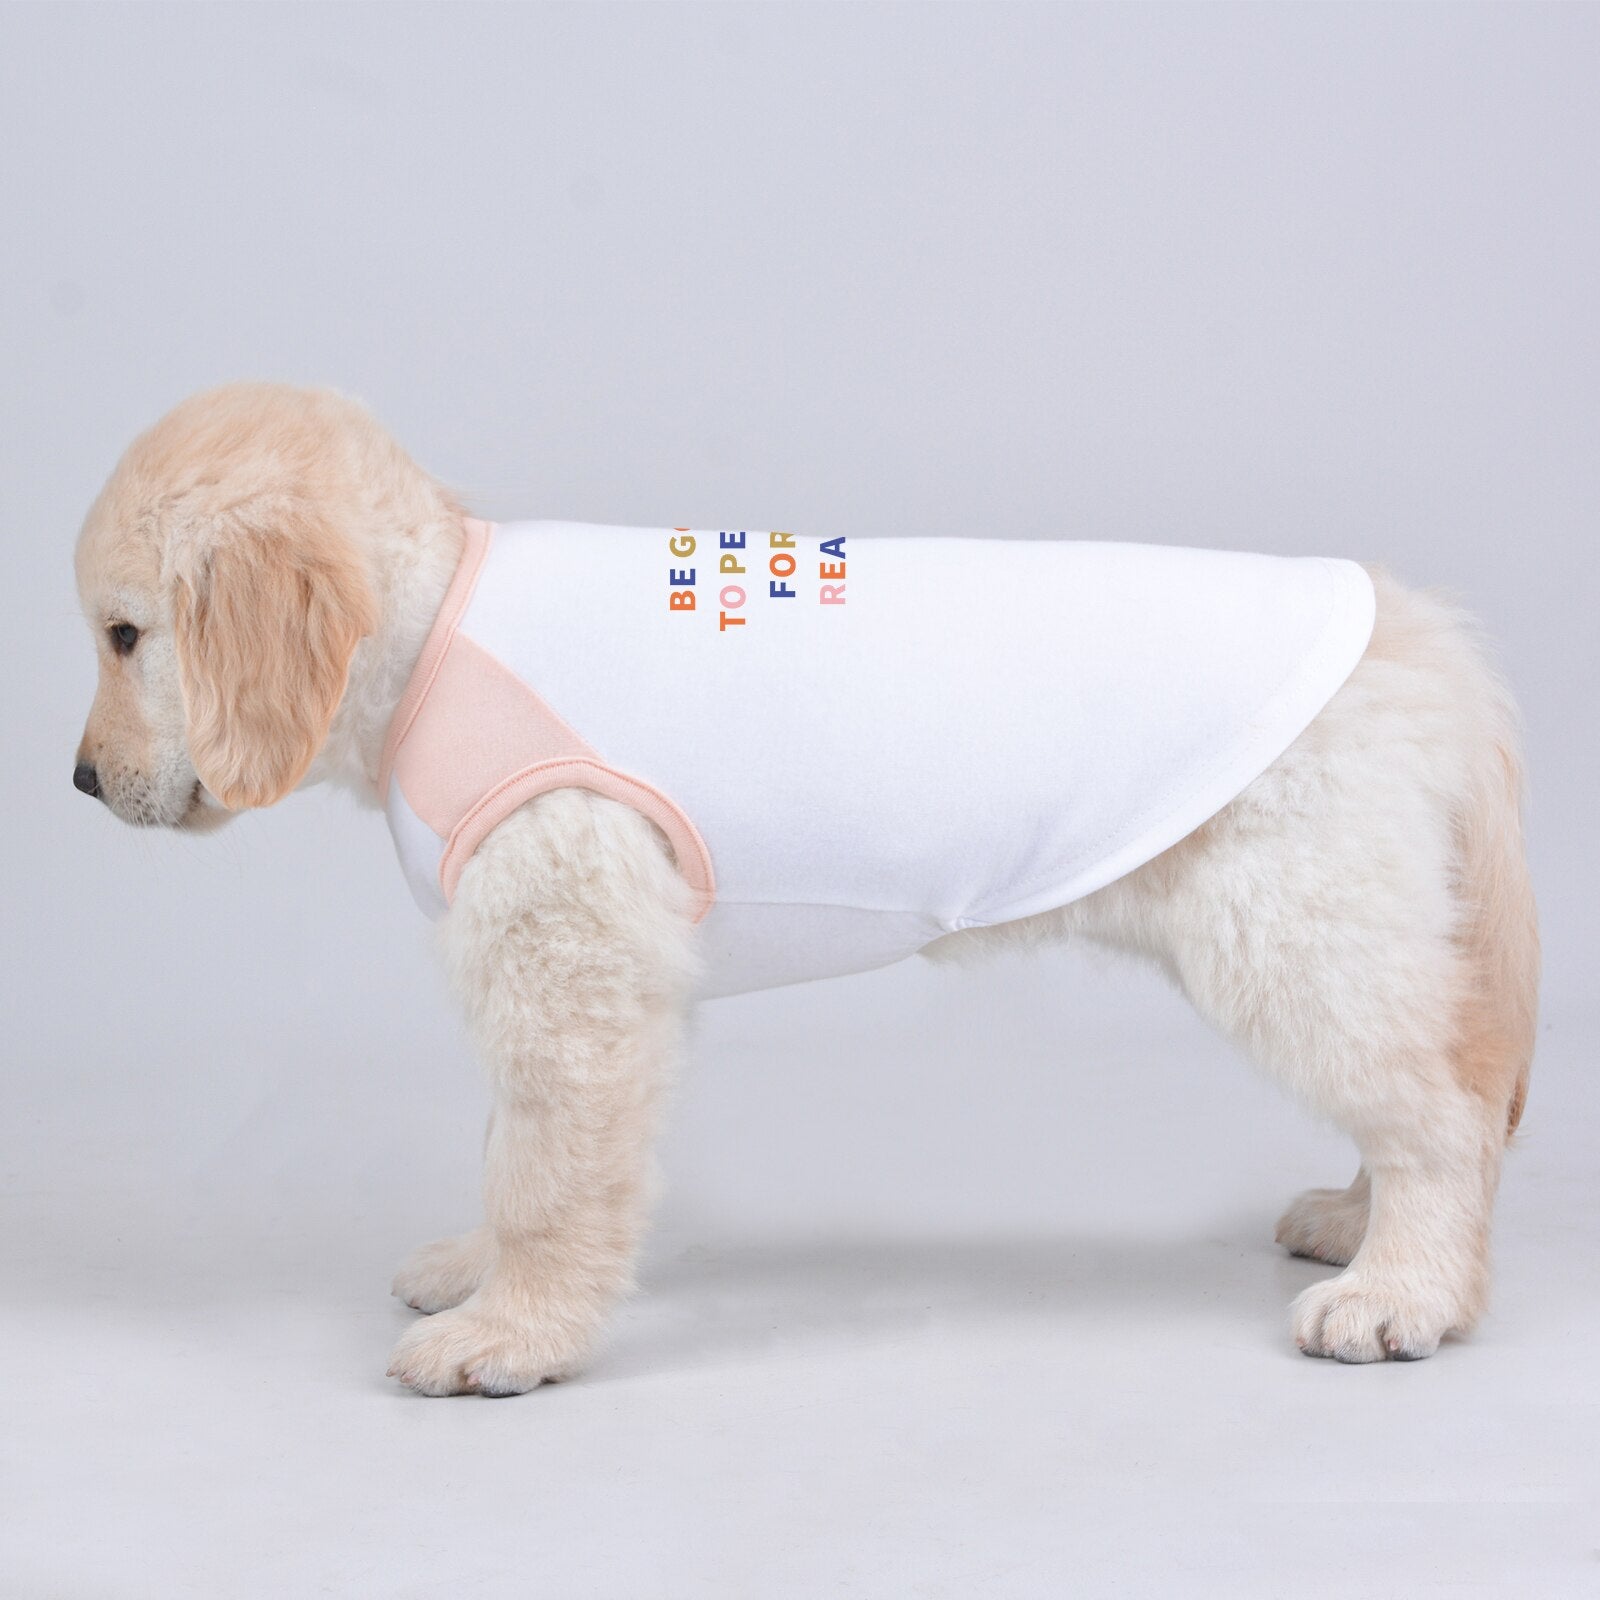 Printed Dog Clothes Sleveless Tshirt Vest Summer for Pets in All Sizes and Ages, Fine Breathable Fabric and High Quality